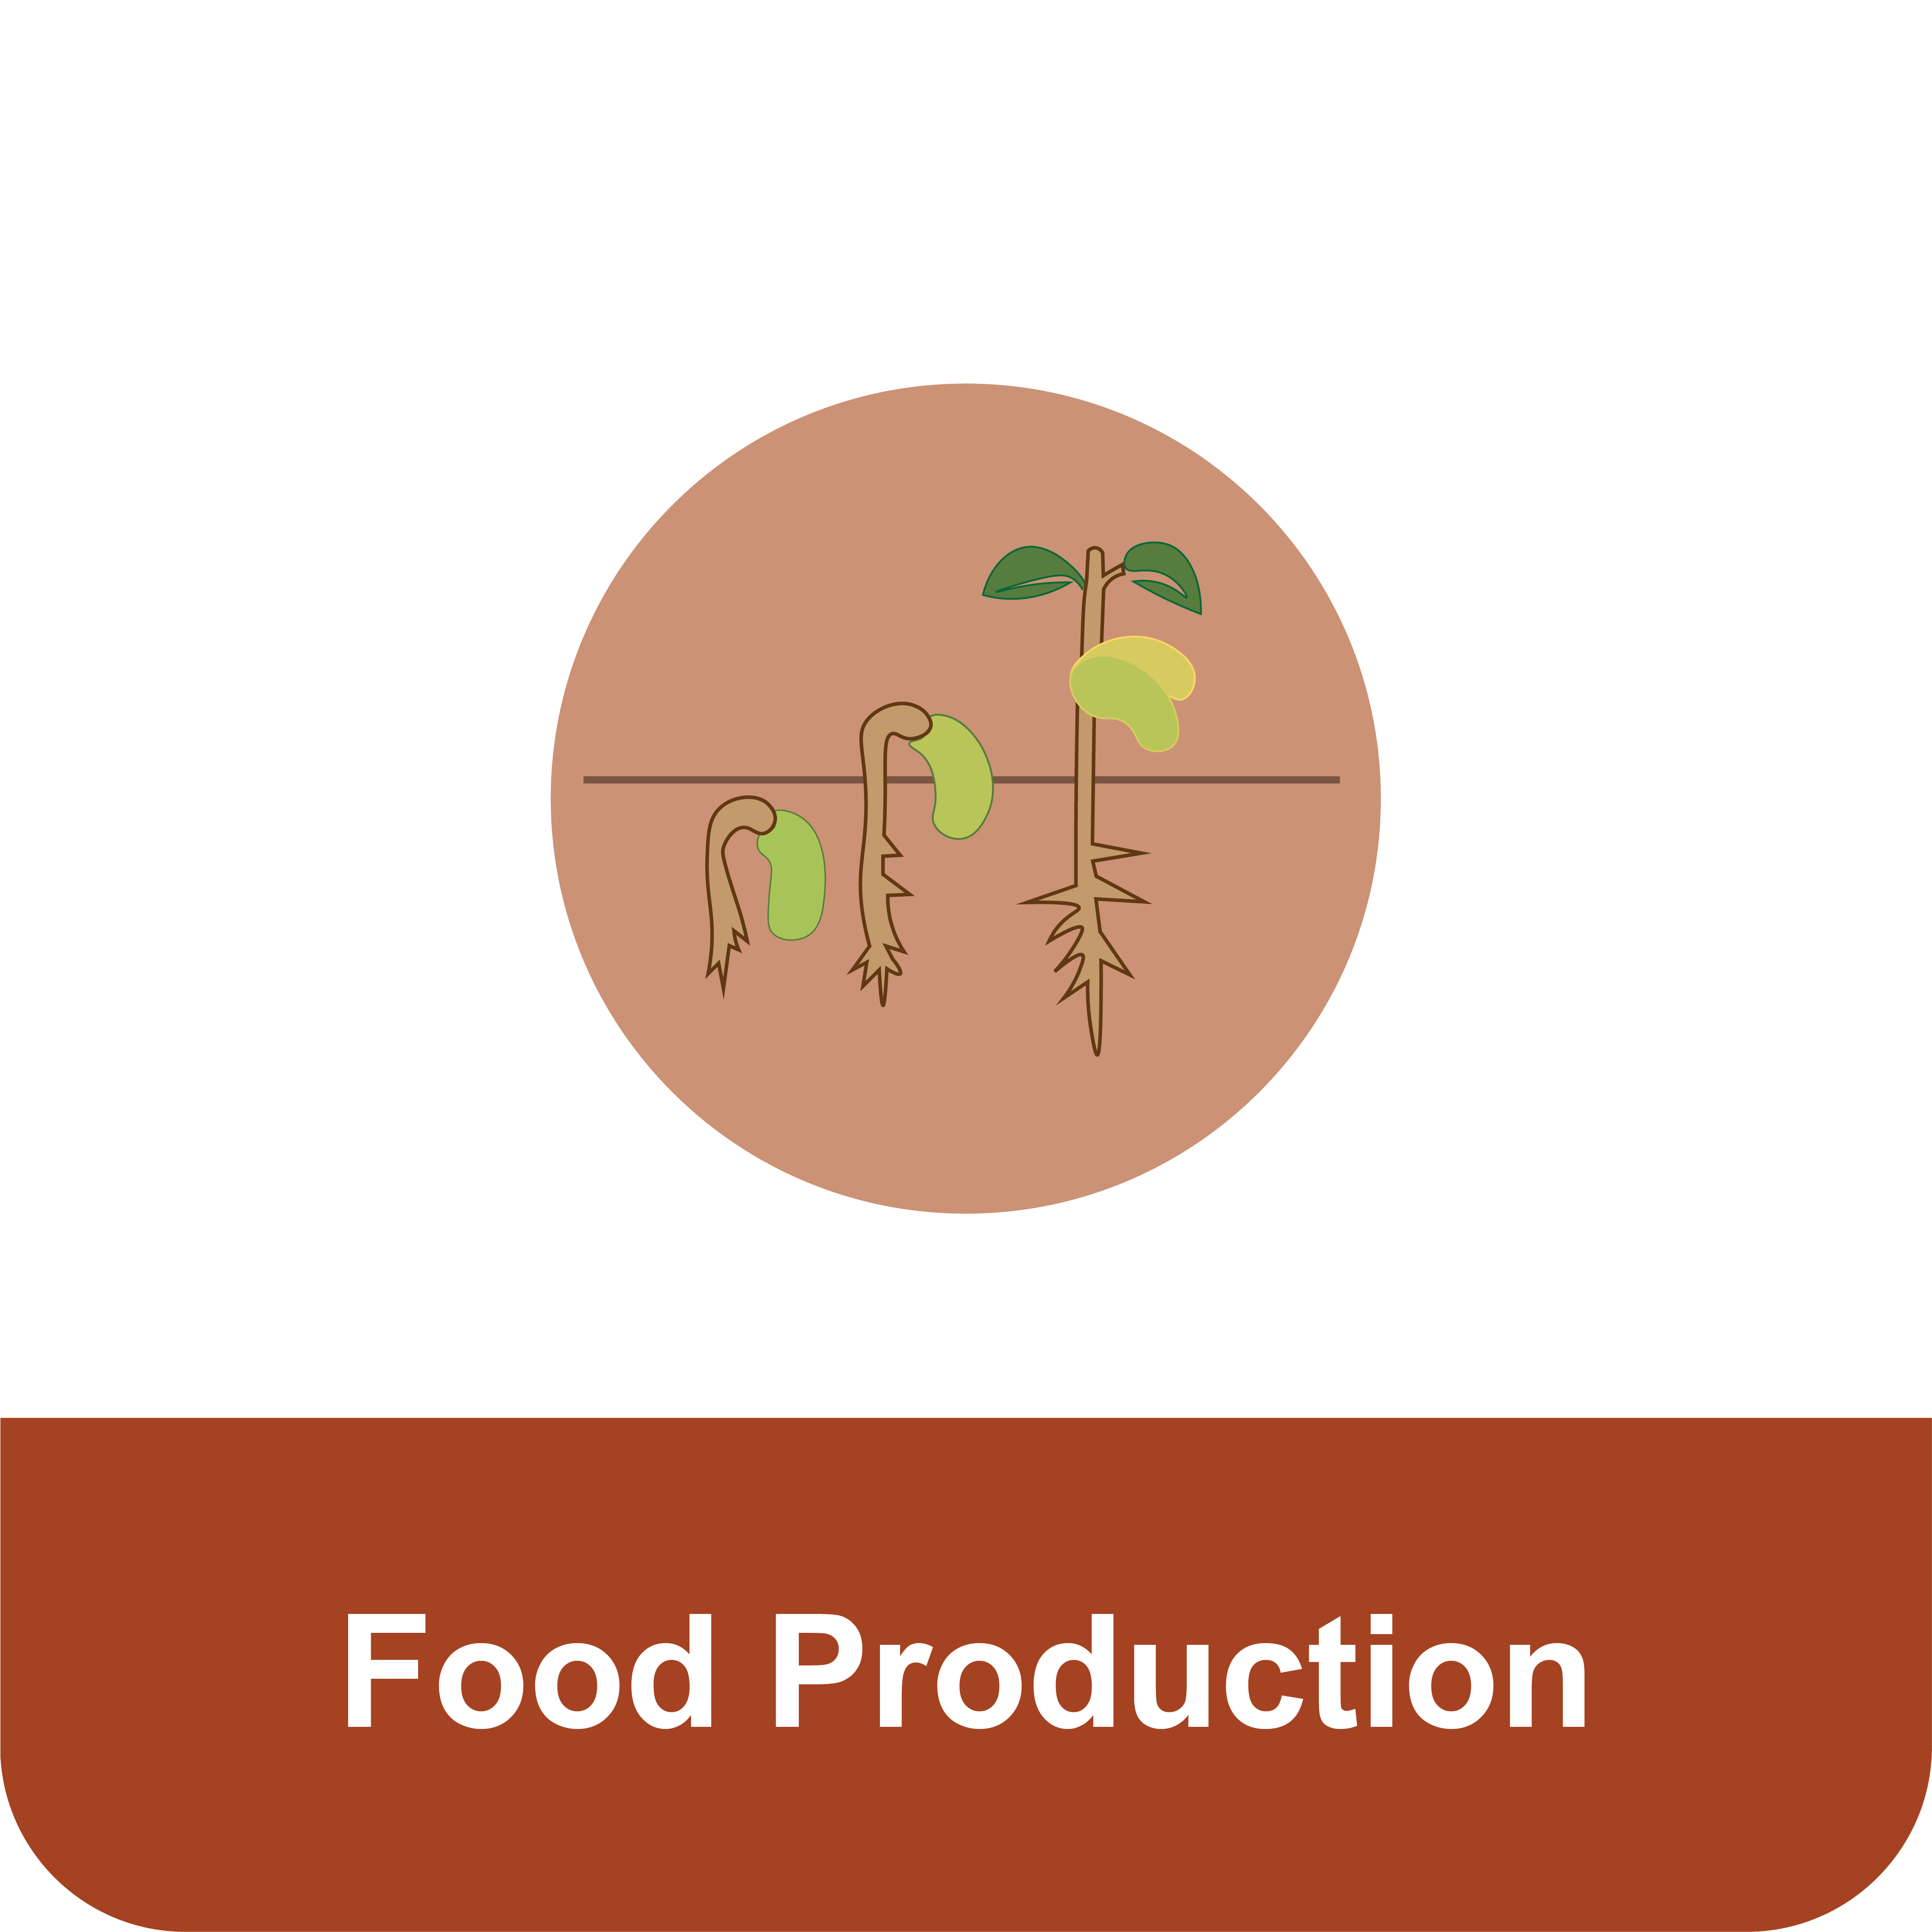 Title that reads "Food Production" under an icon of a seedling growing.